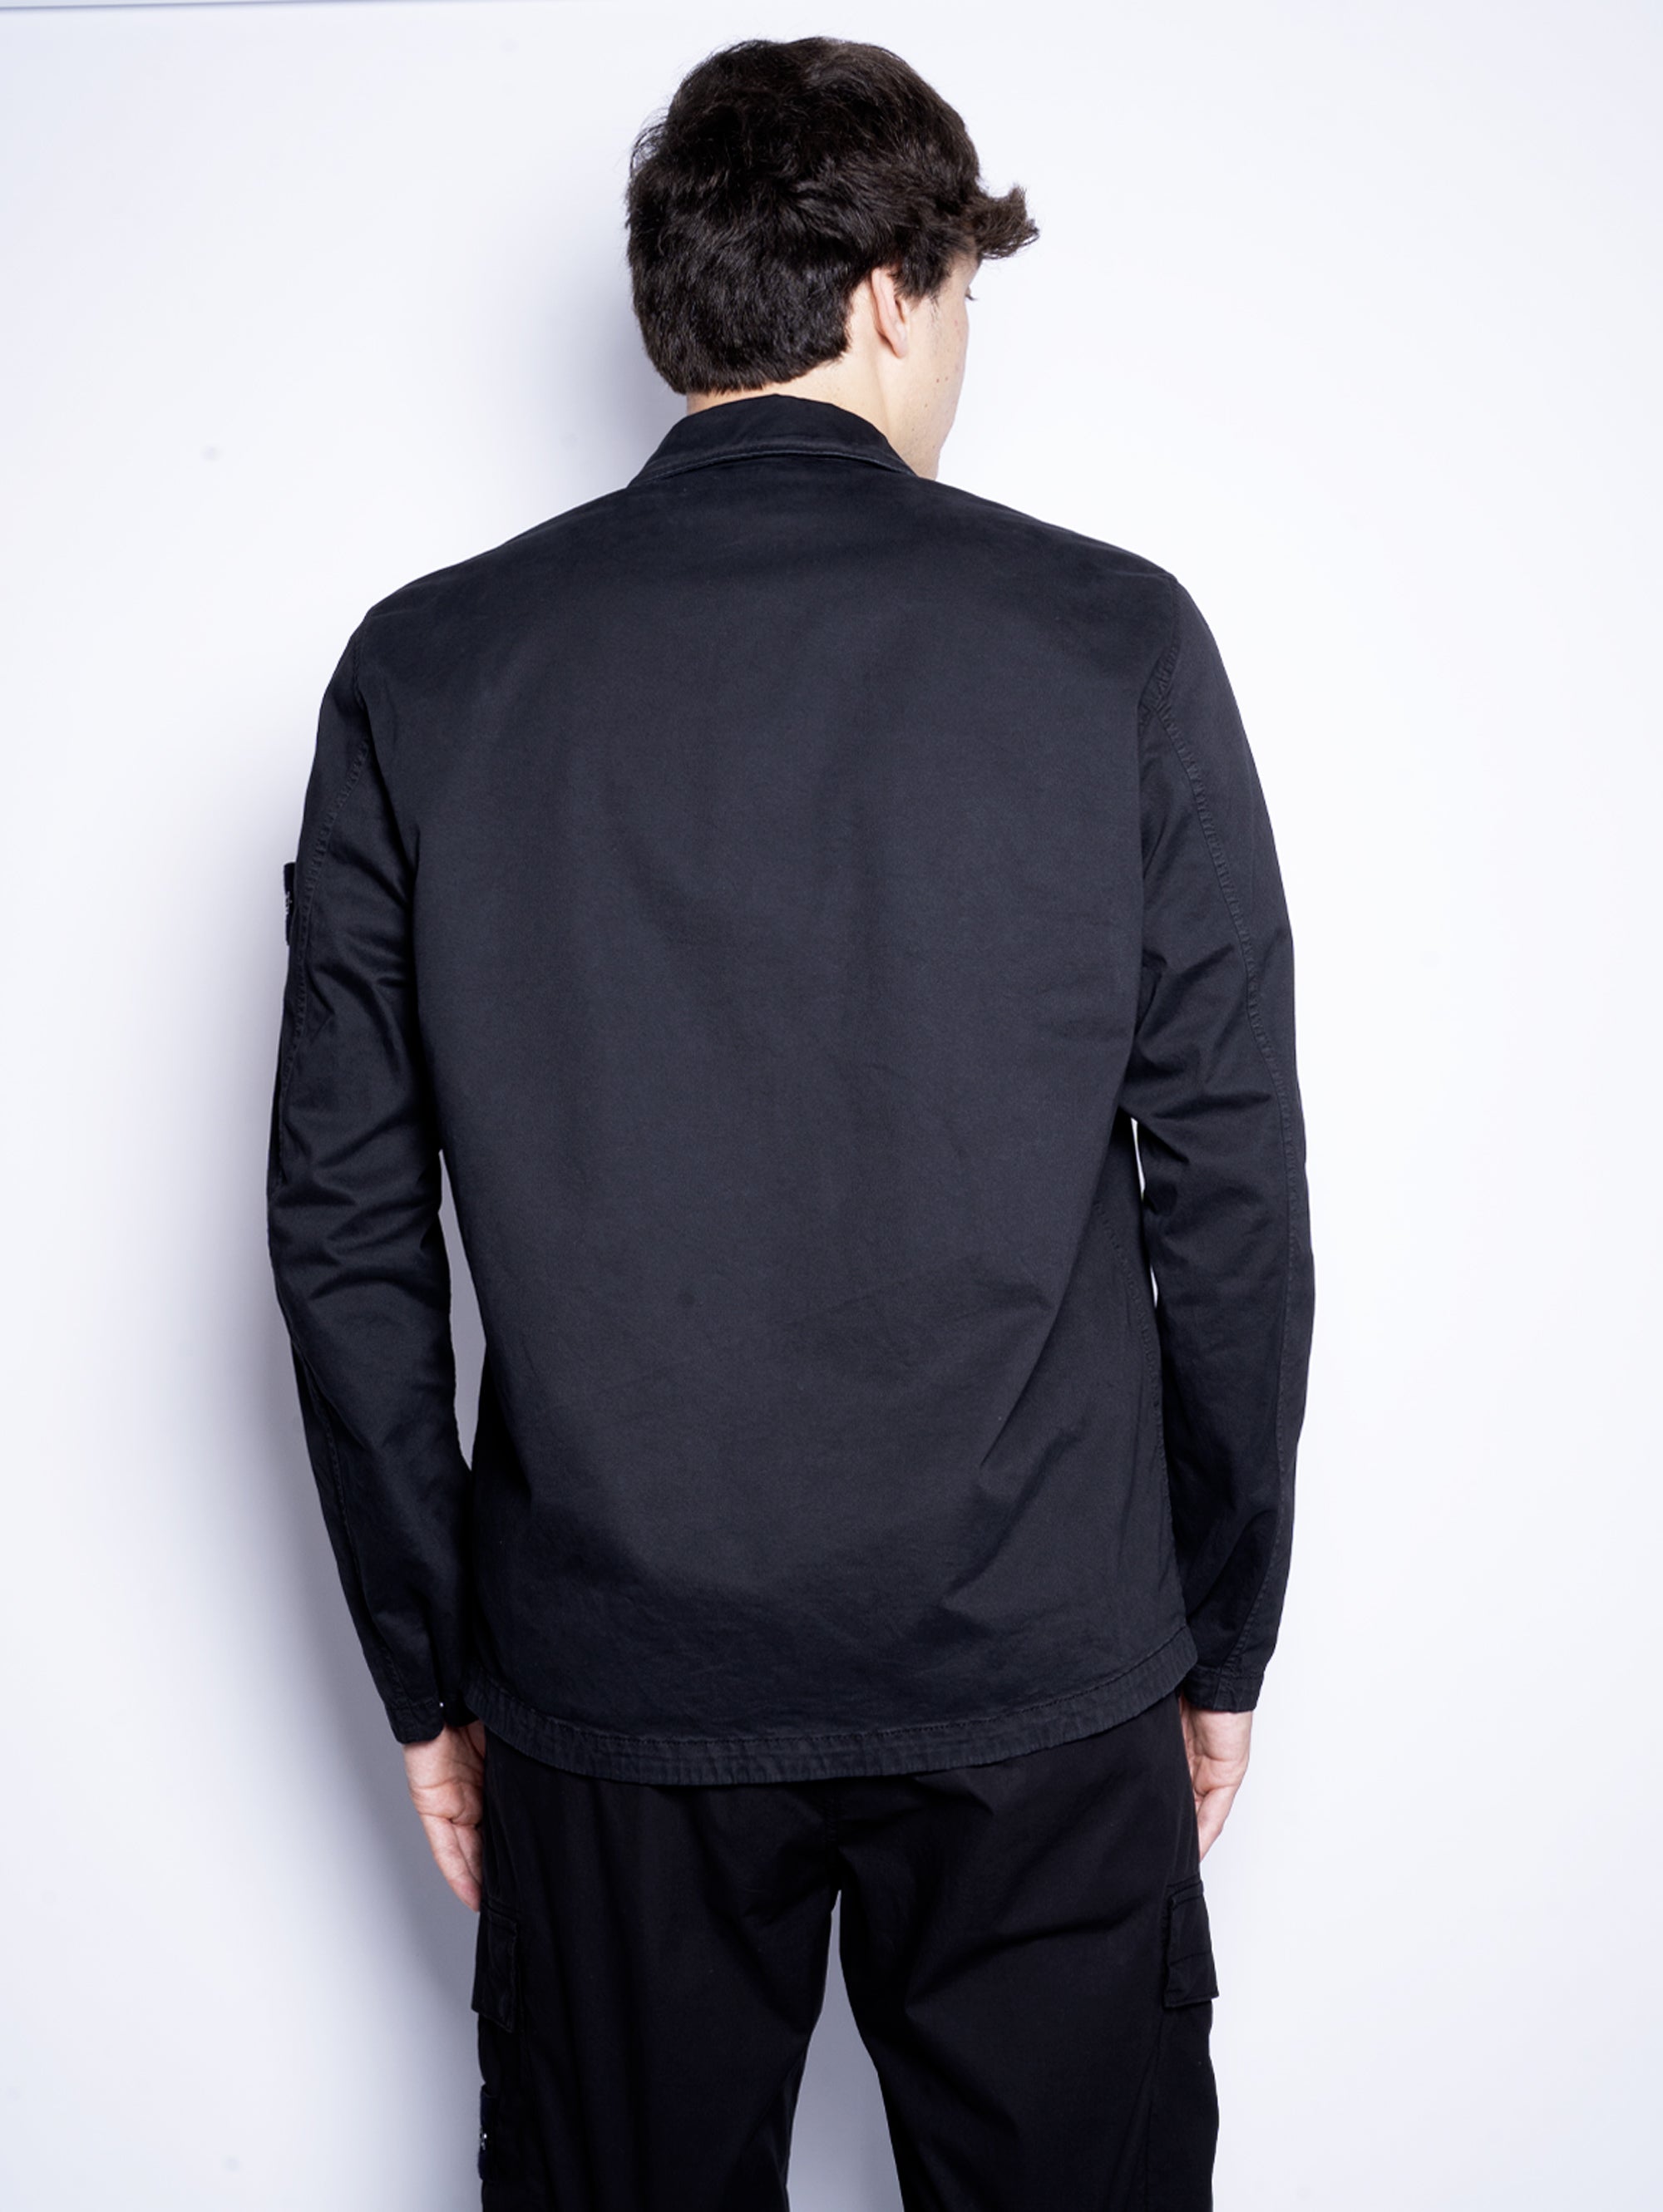 Overshirt in Organic Twill with Old Black treatment